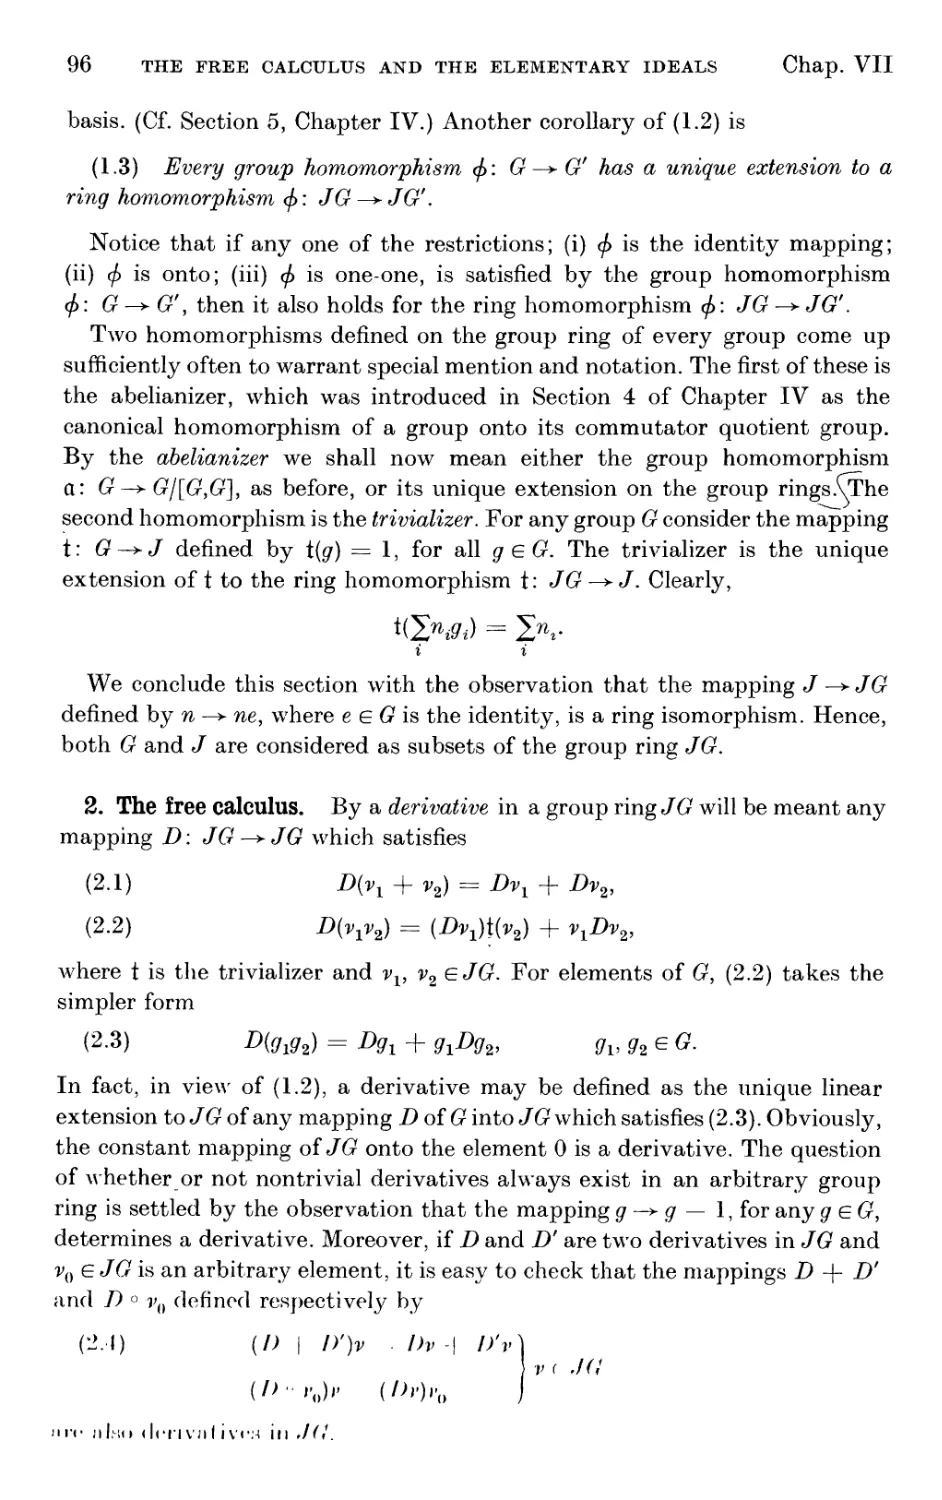 2. The free calculus